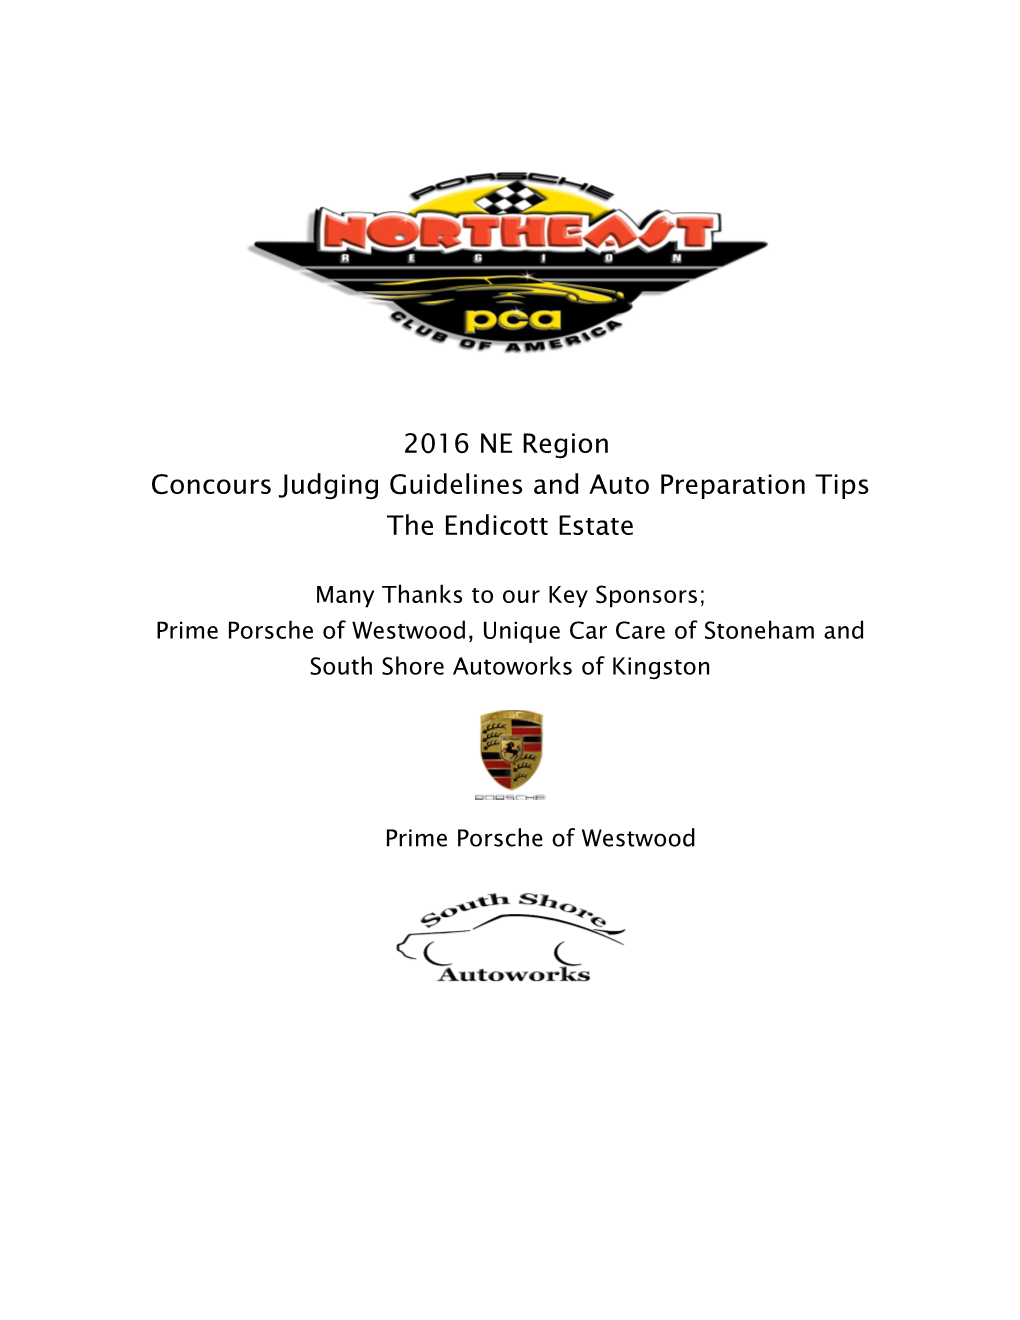 Concours Judging Guidelines and Auto Preparation Tips